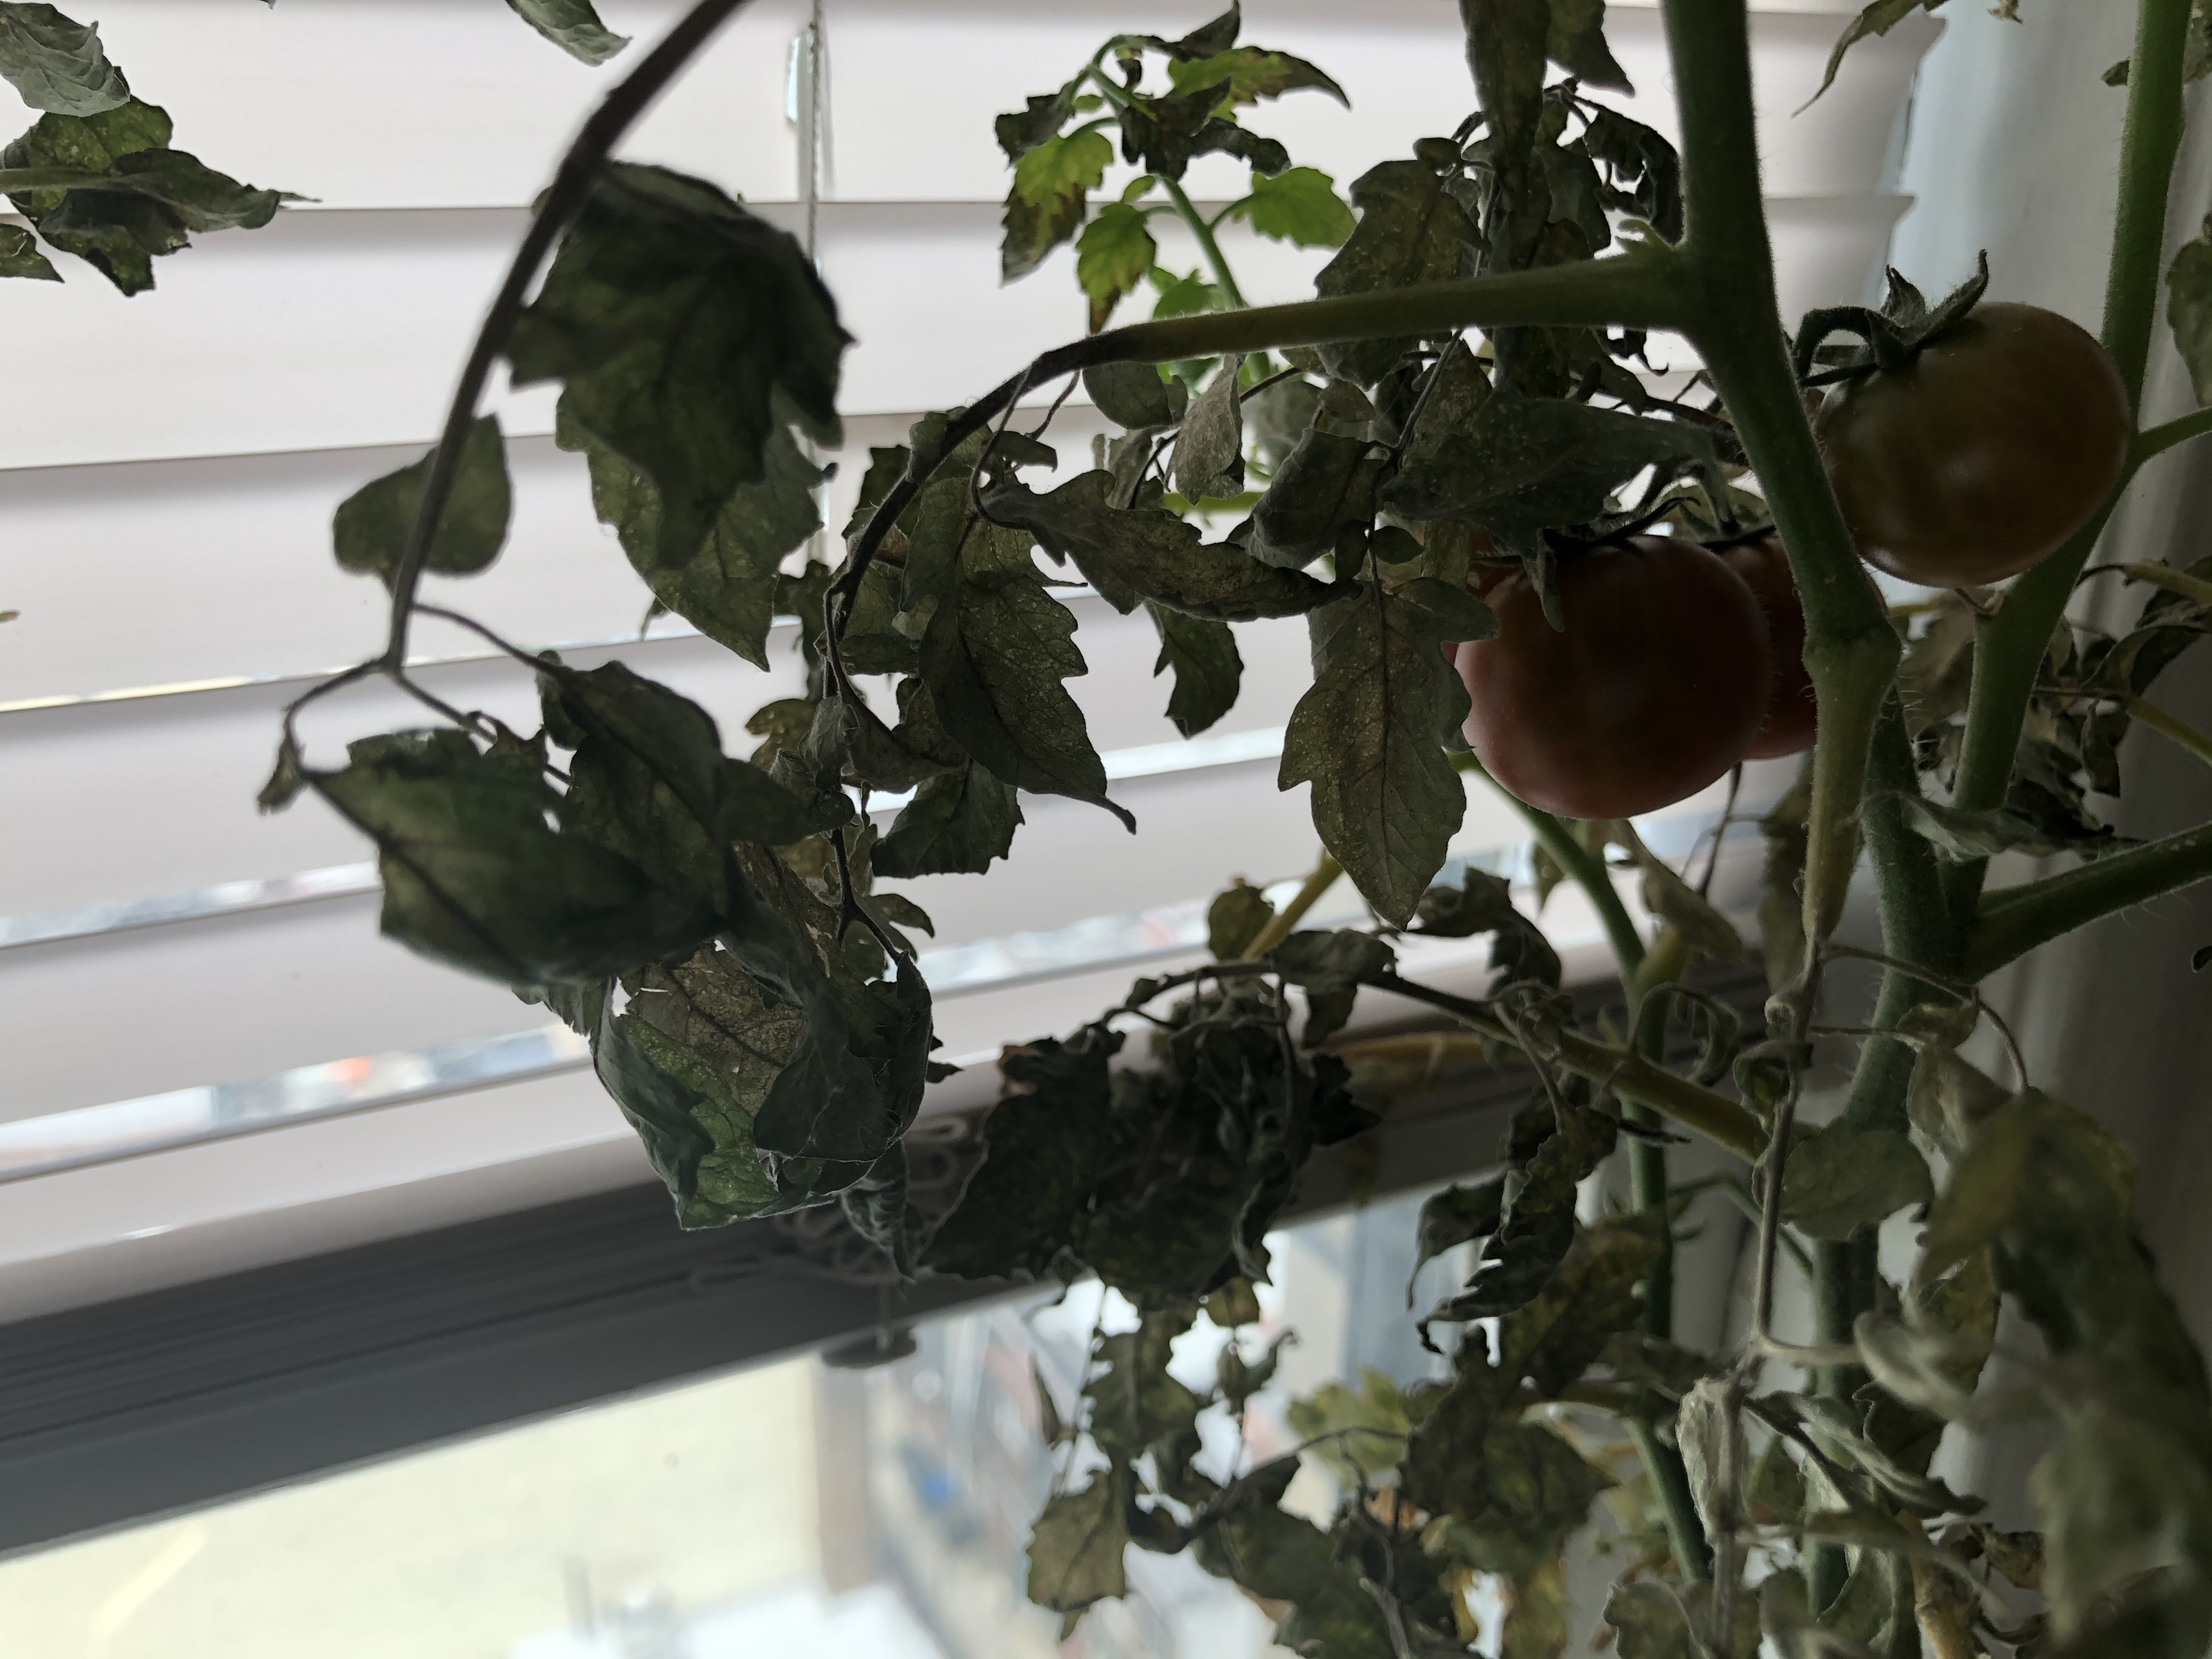 A small indoor tomato plan against a window